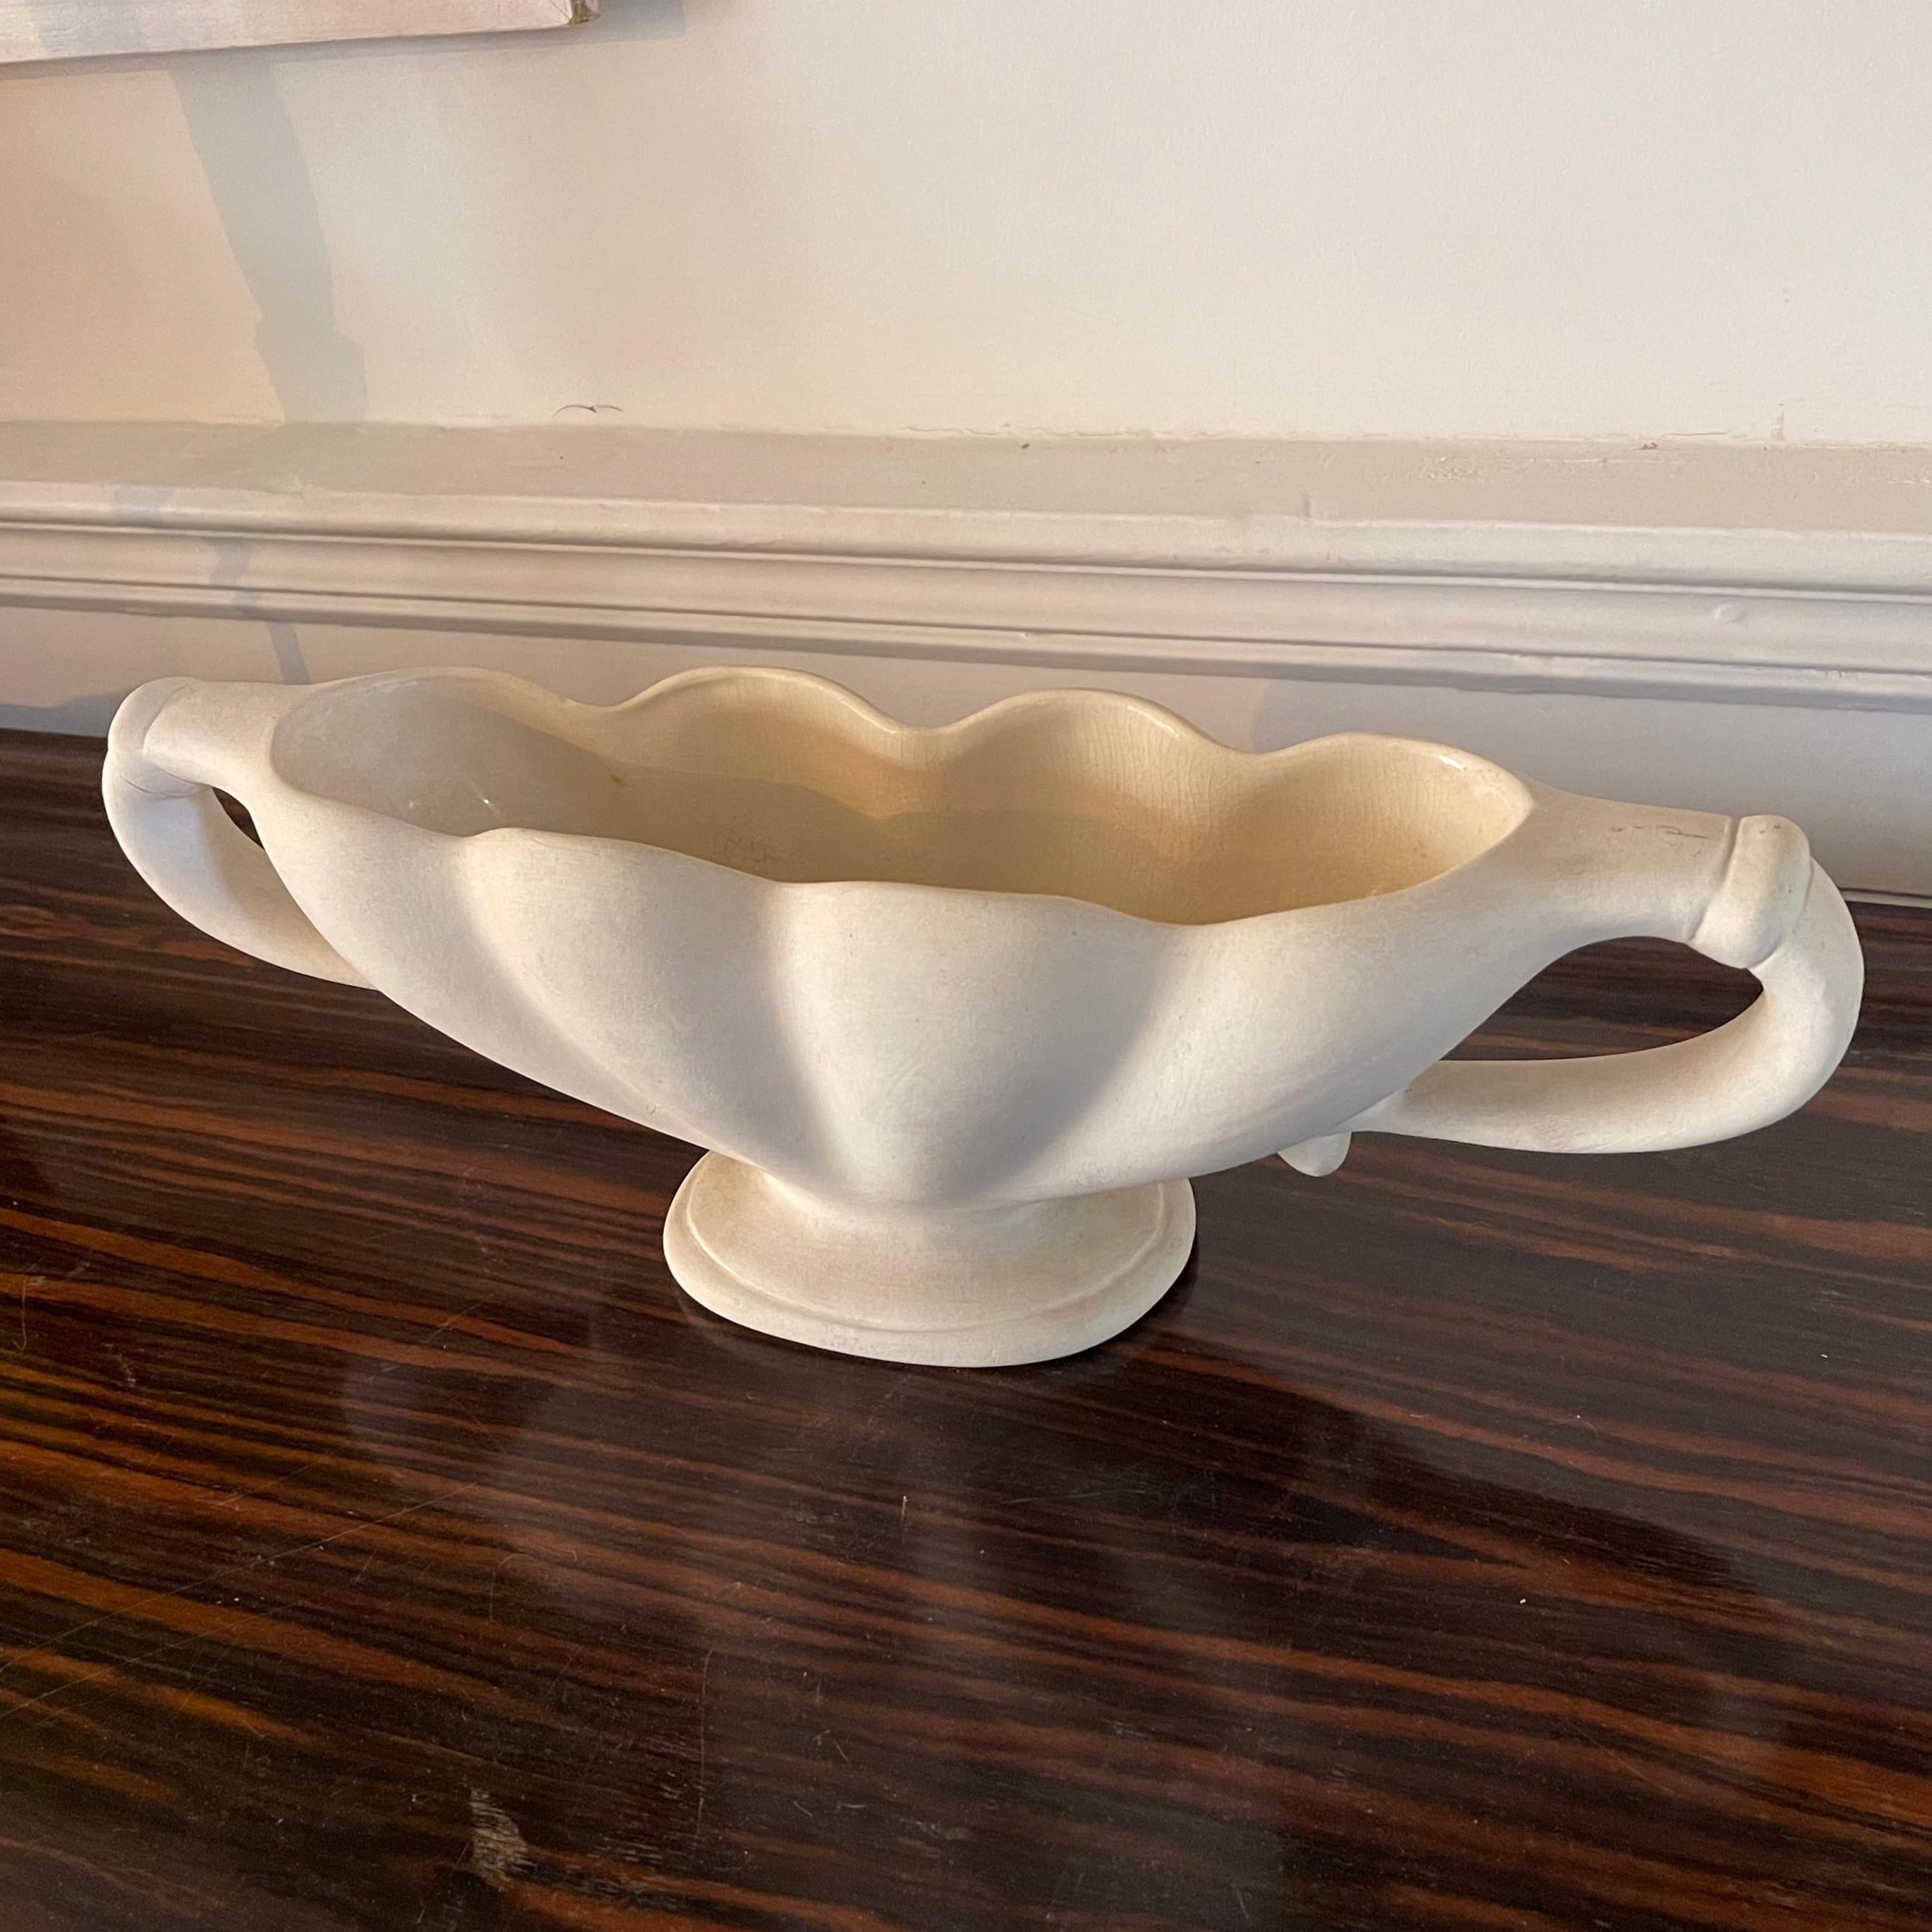 Constance Spry for Fulham Pottery Scalloped Vase, circa 1930s For Sale 2